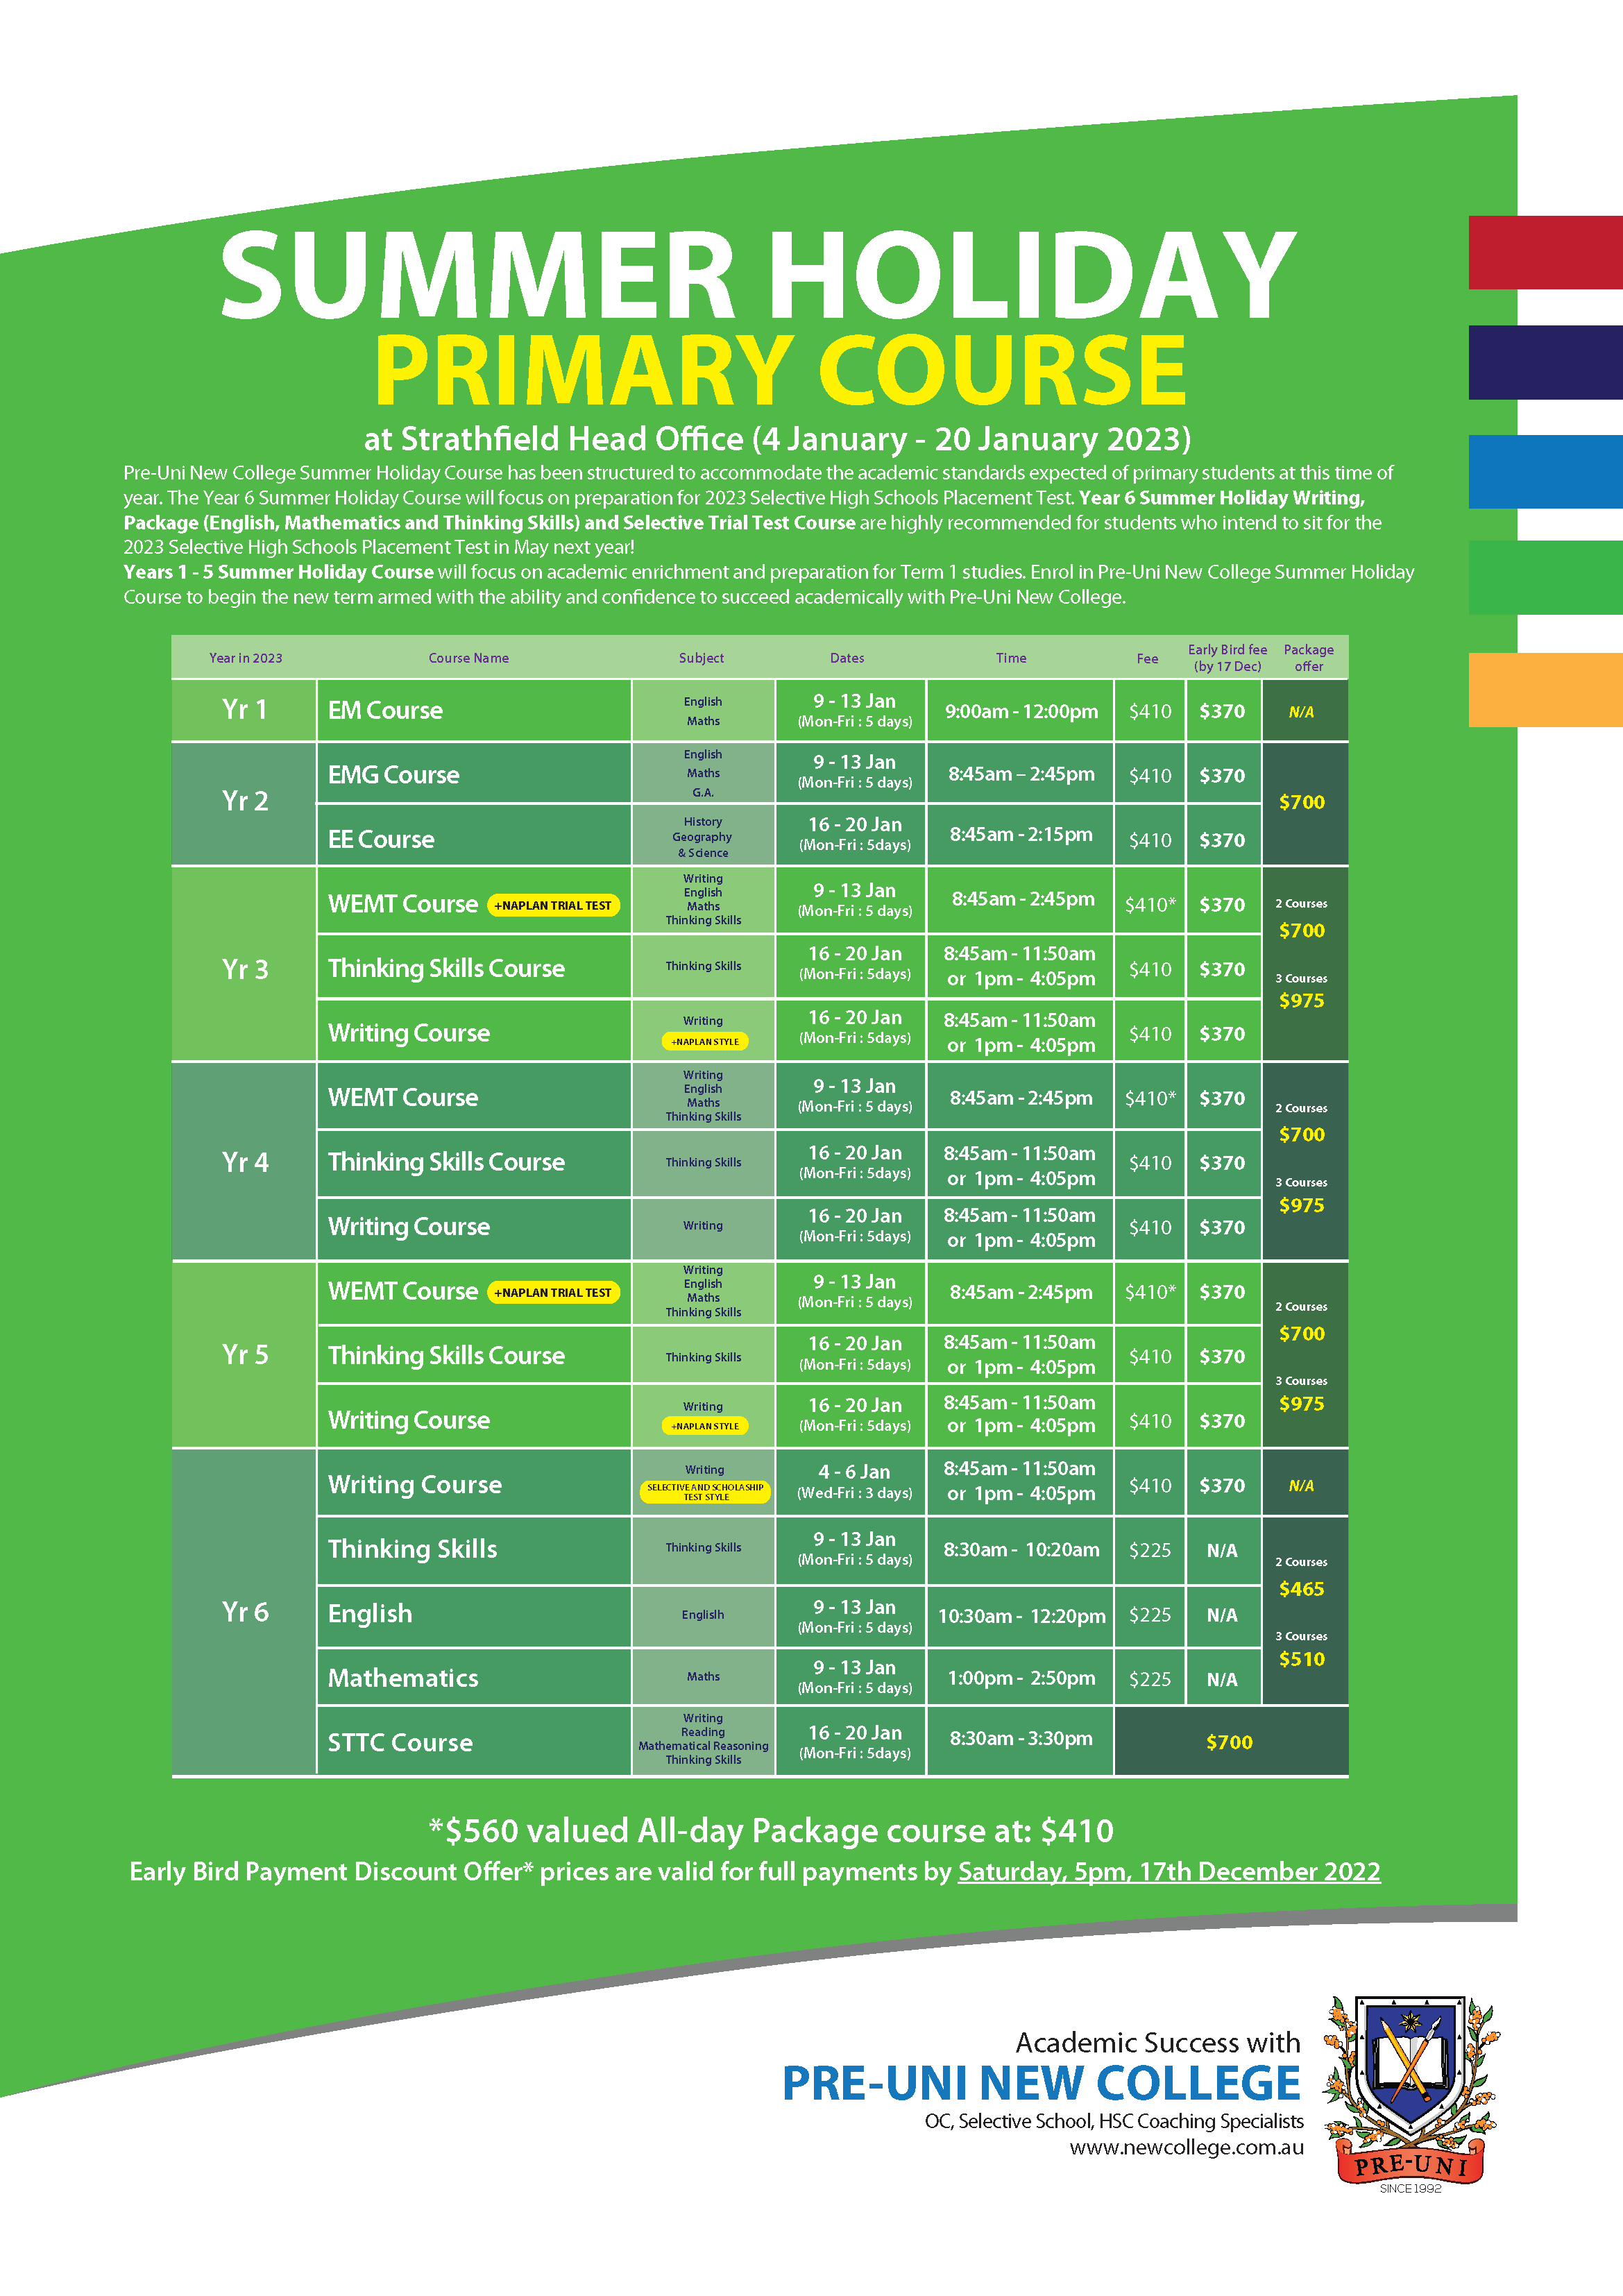 Holiday Courses